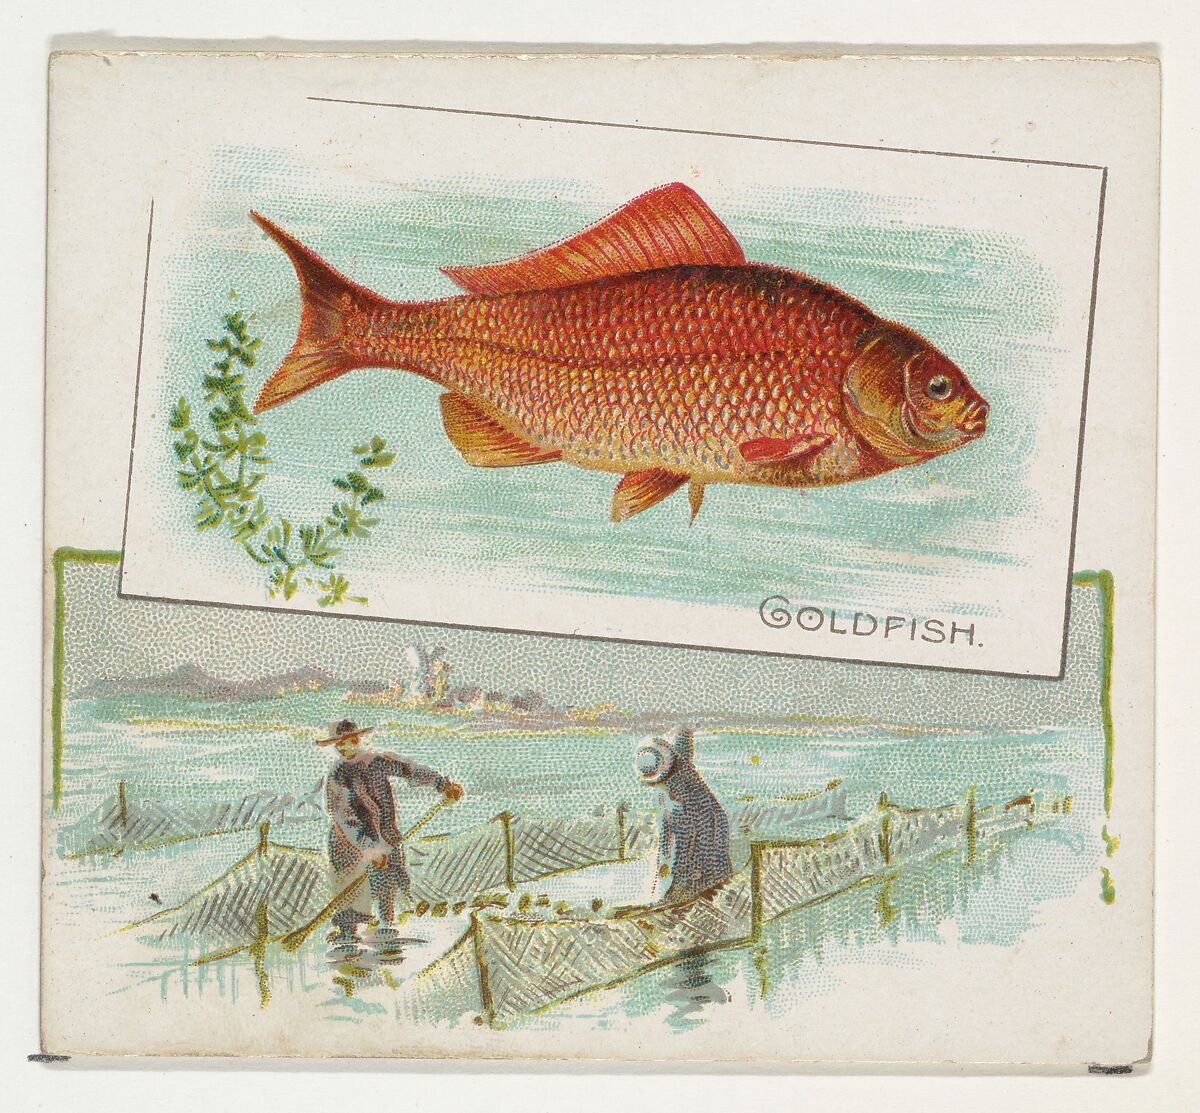 Goldfish, from Fish from American Waters series (N39) for Allen & Ginter Cigarettes, Issued by Allen &amp; Ginter (American, Richmond, Virginia), Commercial color lithograph 